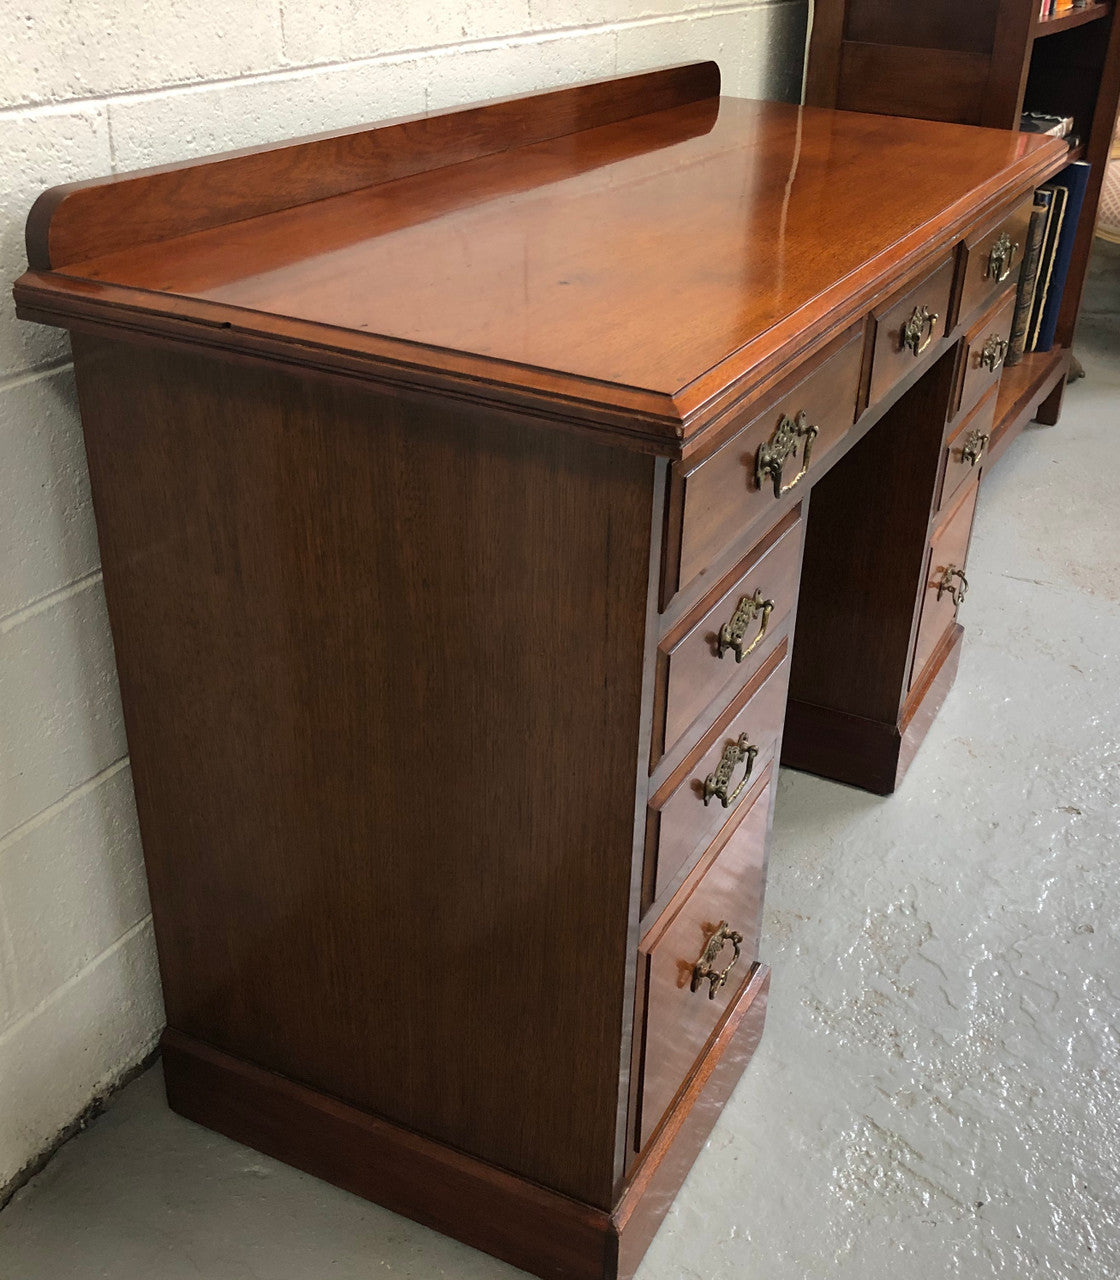 Fabulous small size walnut desk, with nine drawers and decorative brass handles and in good original condition.